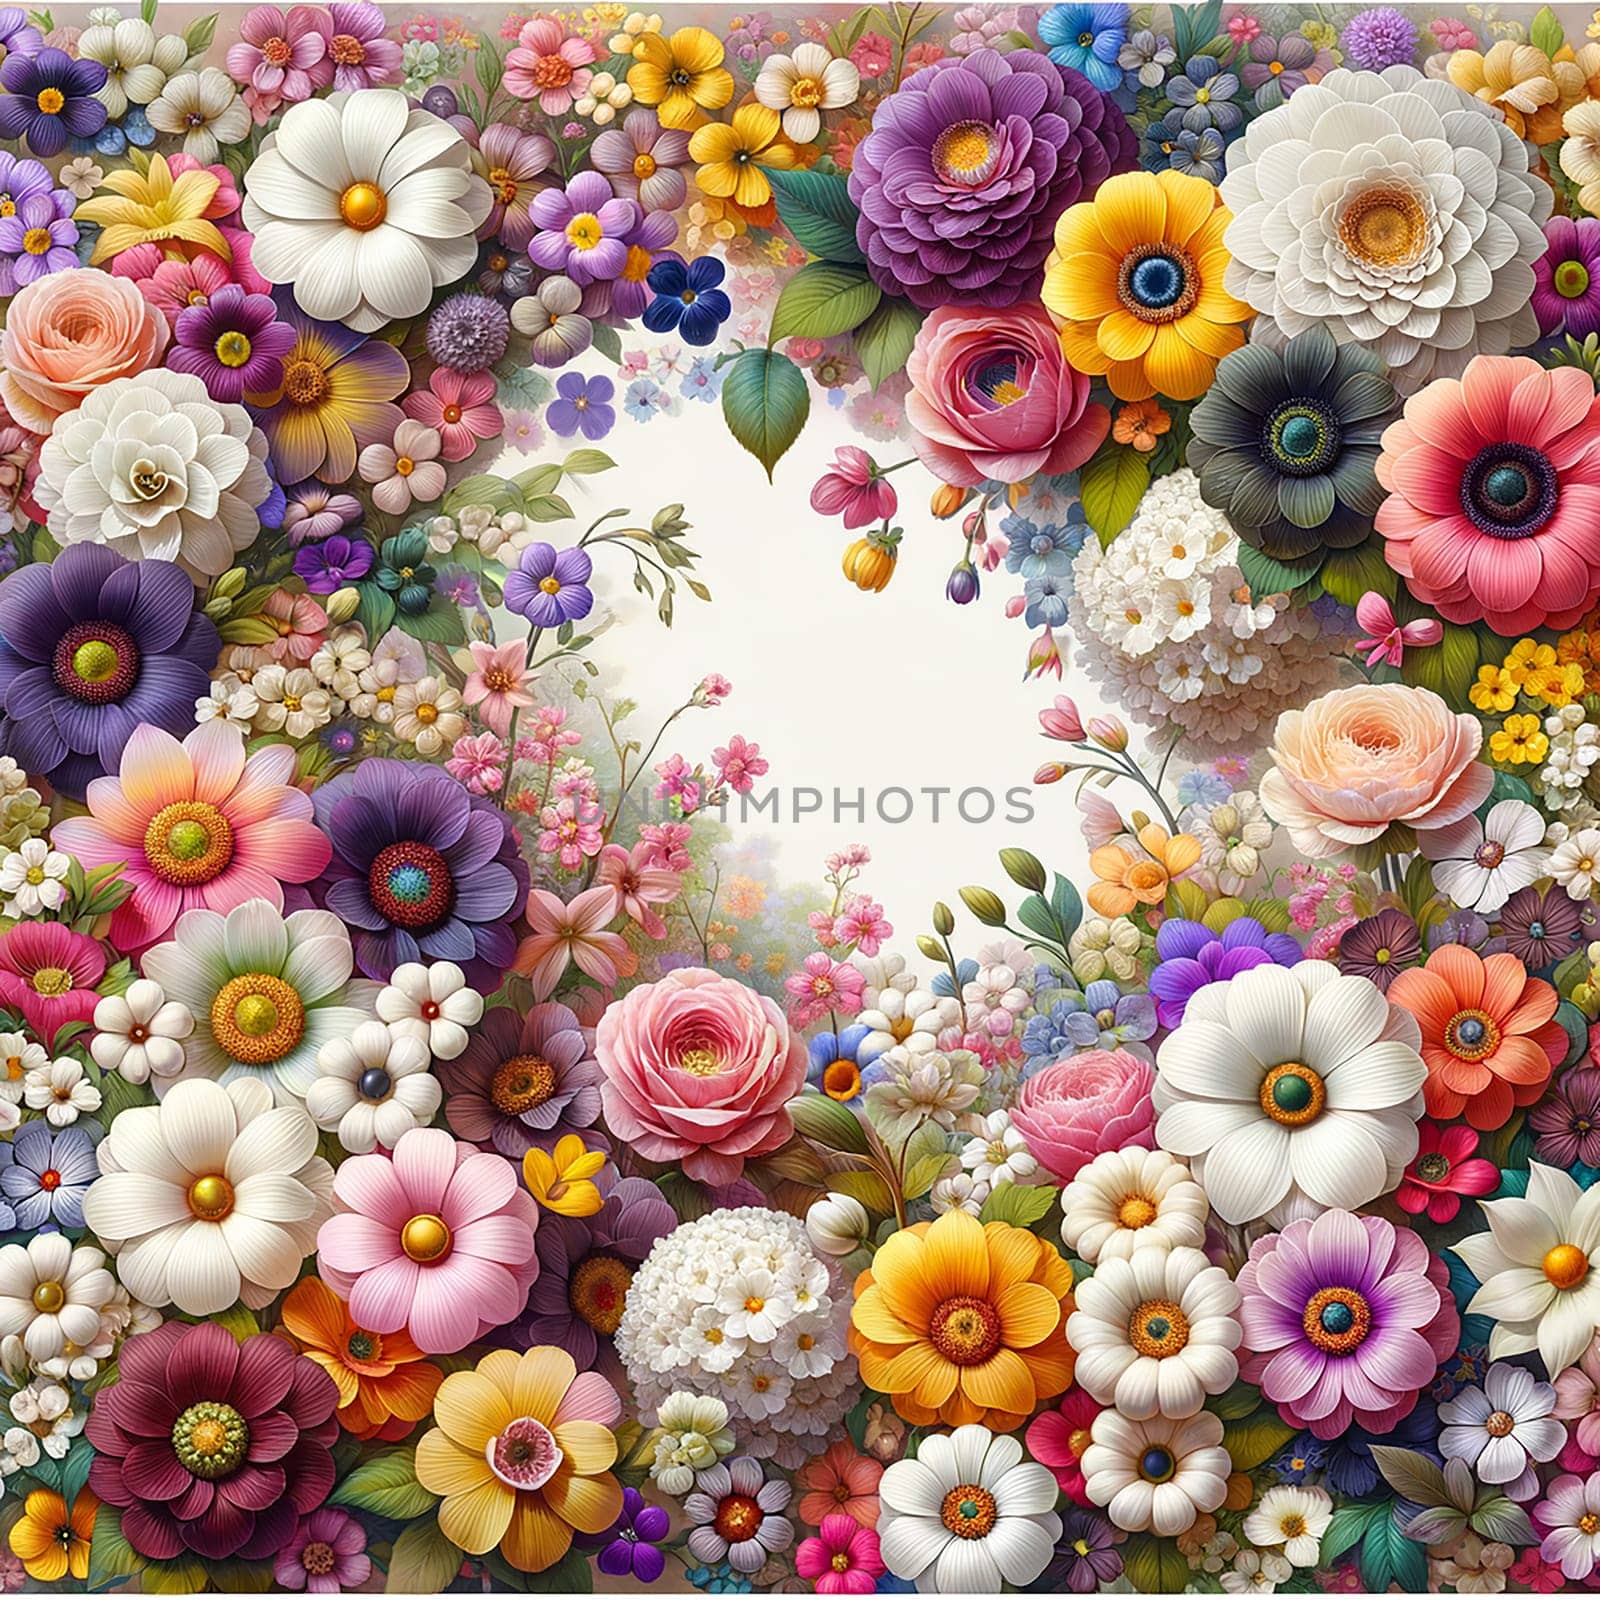 Blossoming Borders: Artistic Spring Flowers Frame by Petrichor